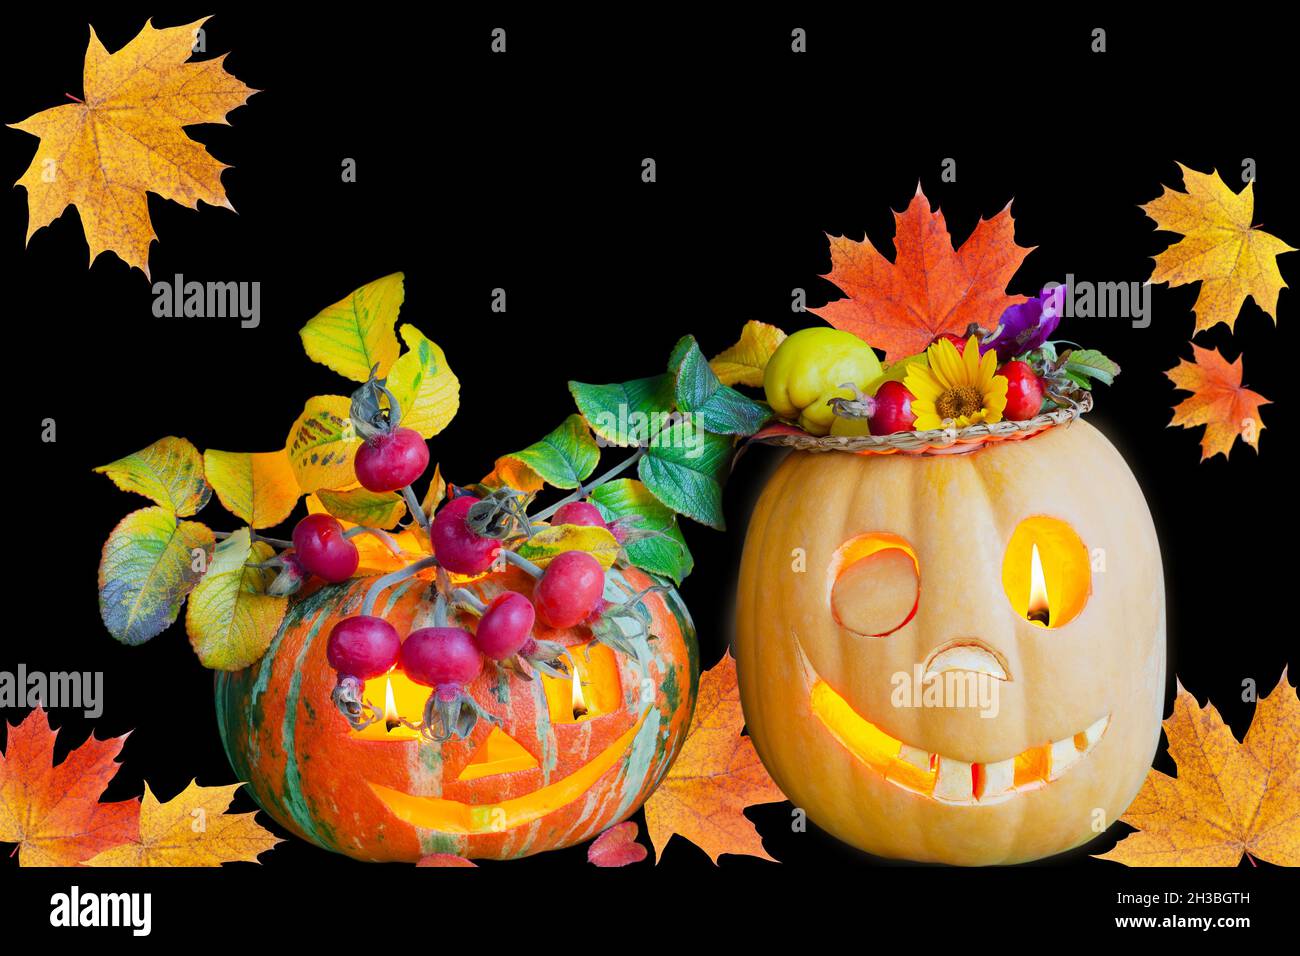 Funny Halloween pumpkins on a black background Stock Photo